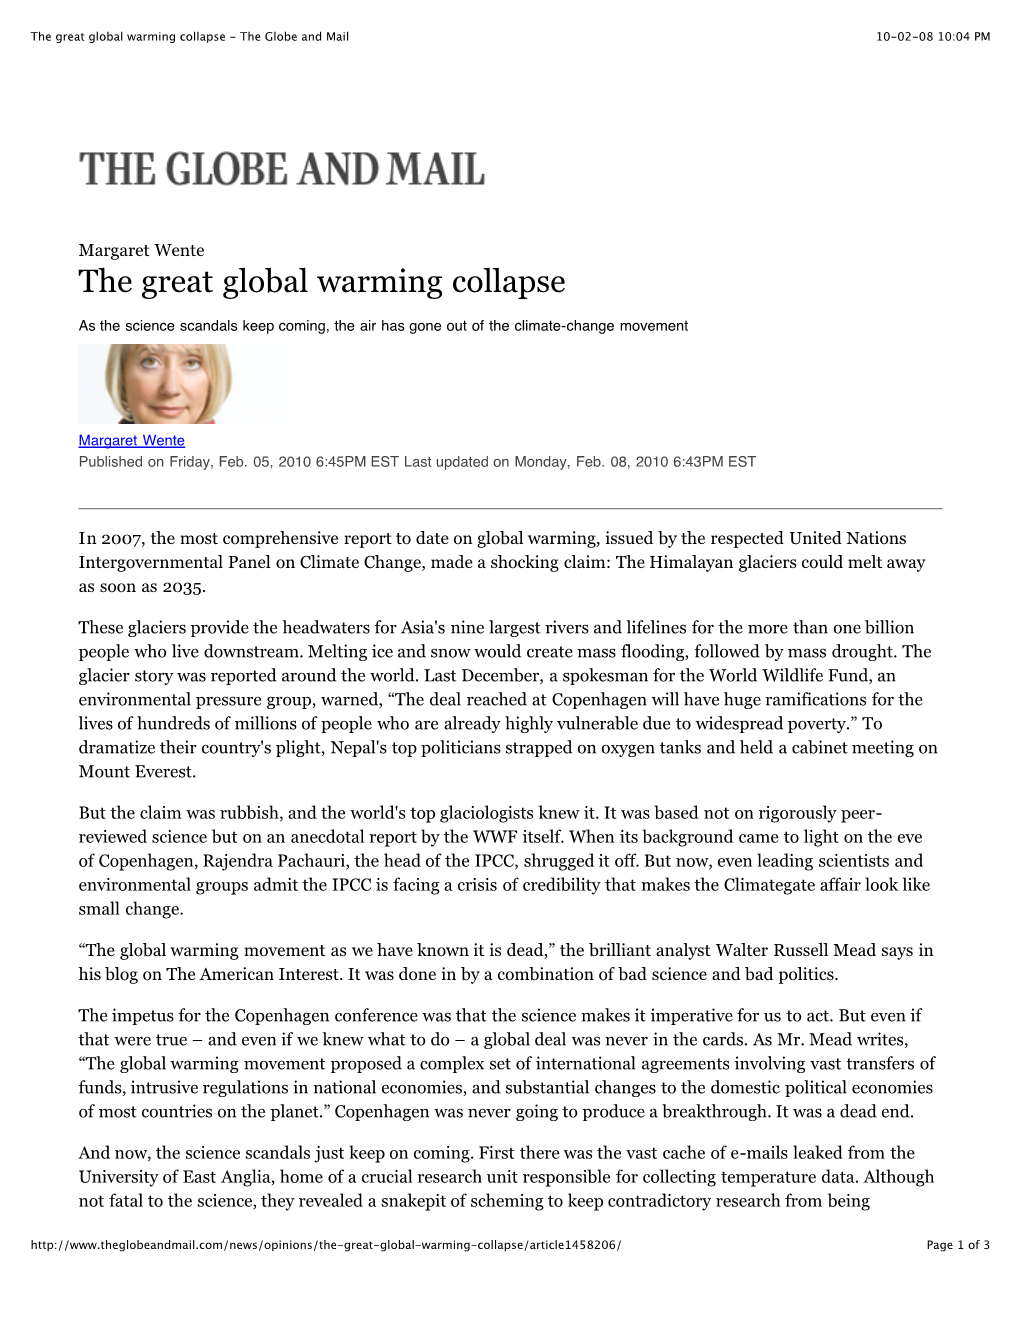 The Great Global Warming Collapse - the Globe and Mail 10-02-08 10:04 PM